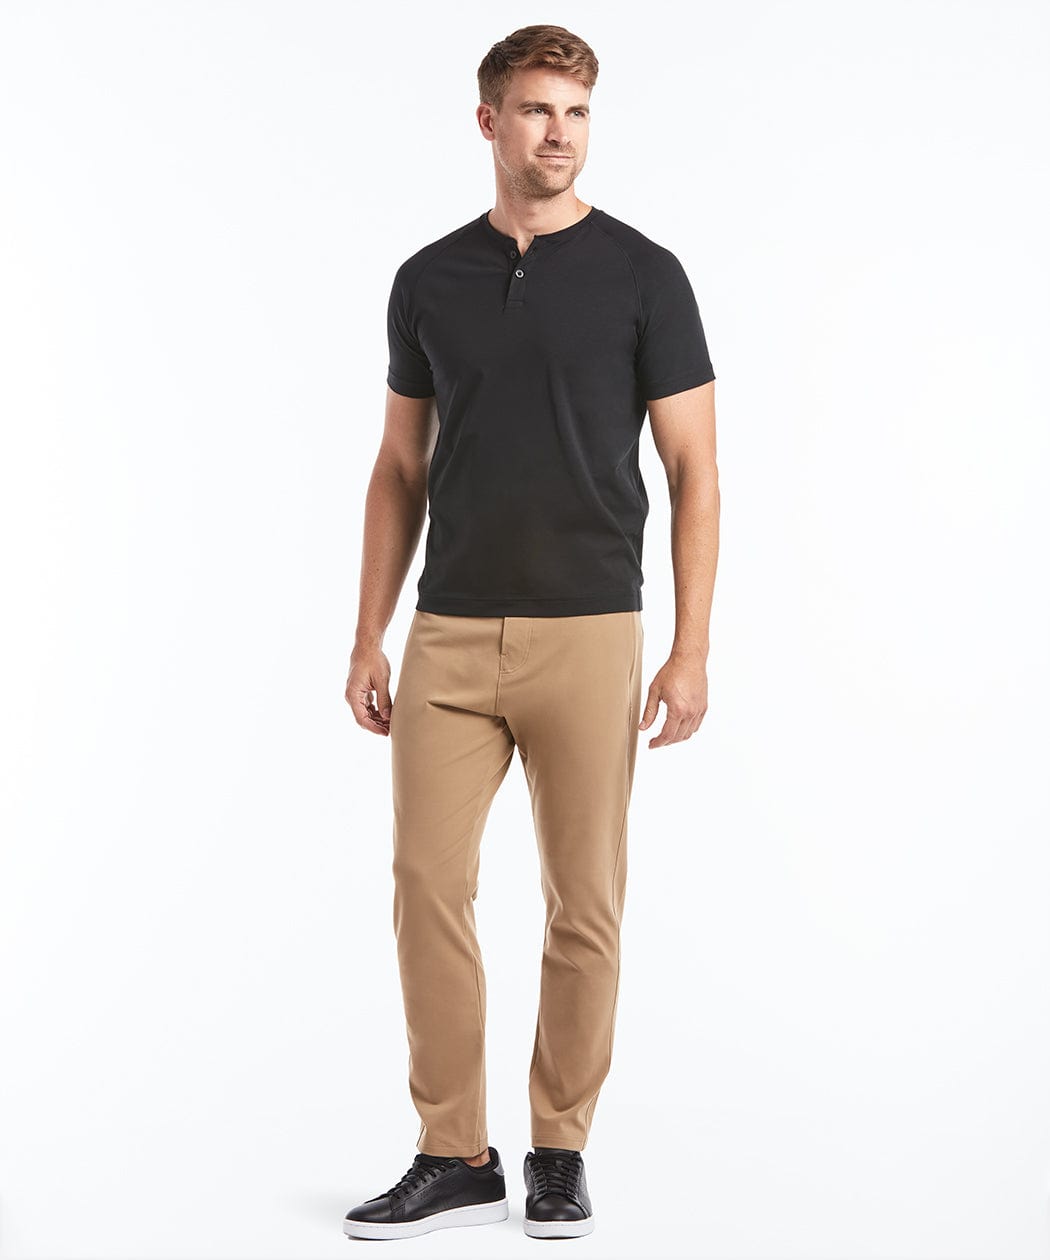 Public Rec: All Day Every Day Pant  Athleisure men, Pants, Mens outfits